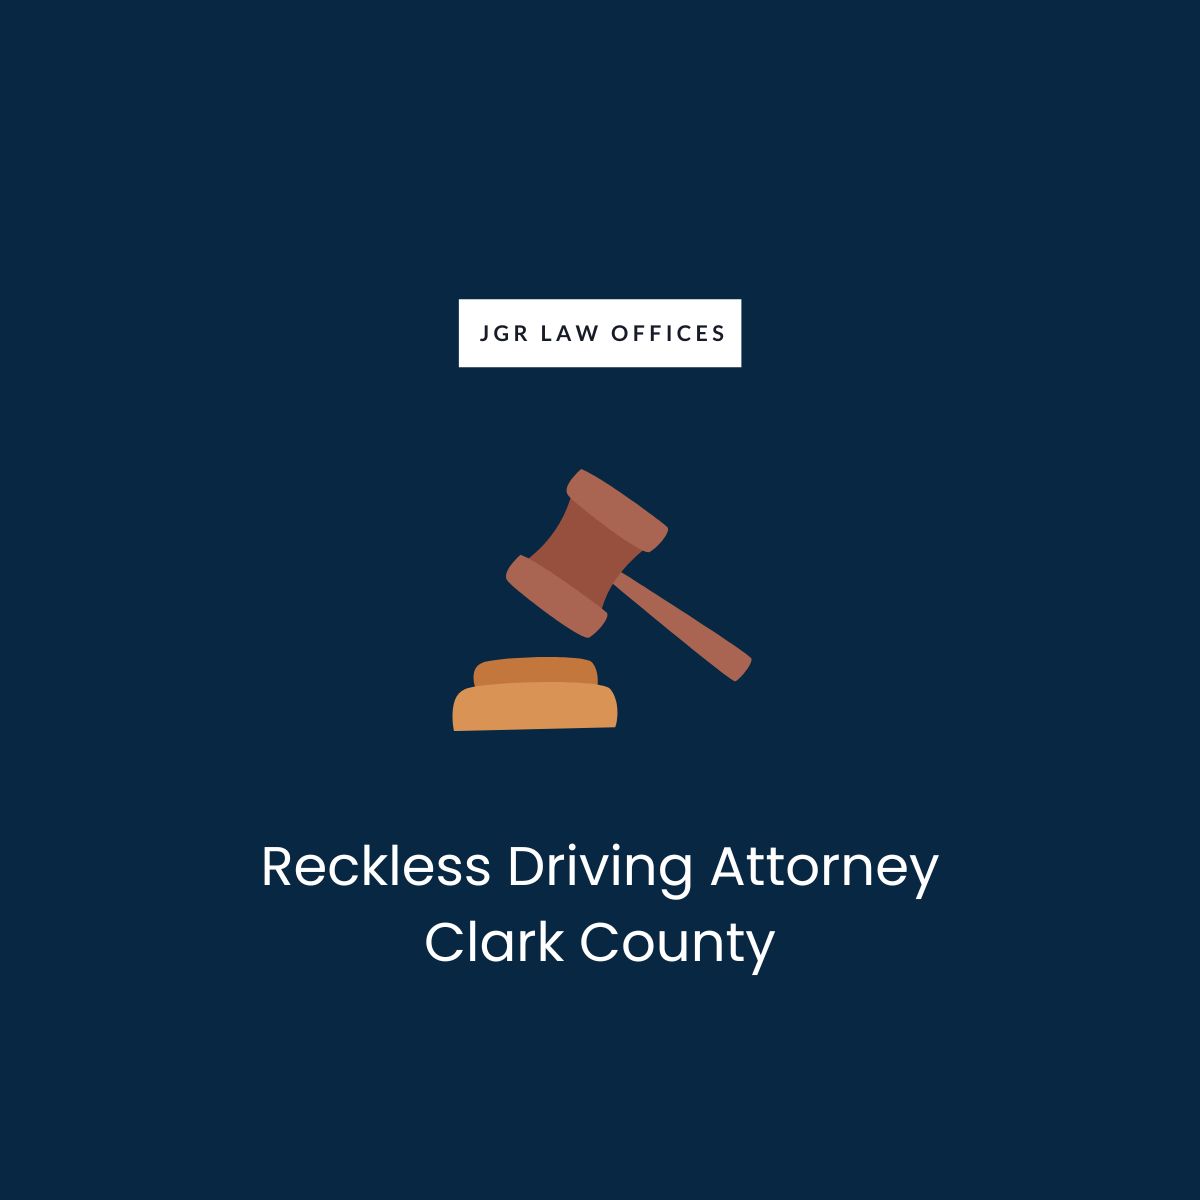 Reckless Driving Attorney Clark County